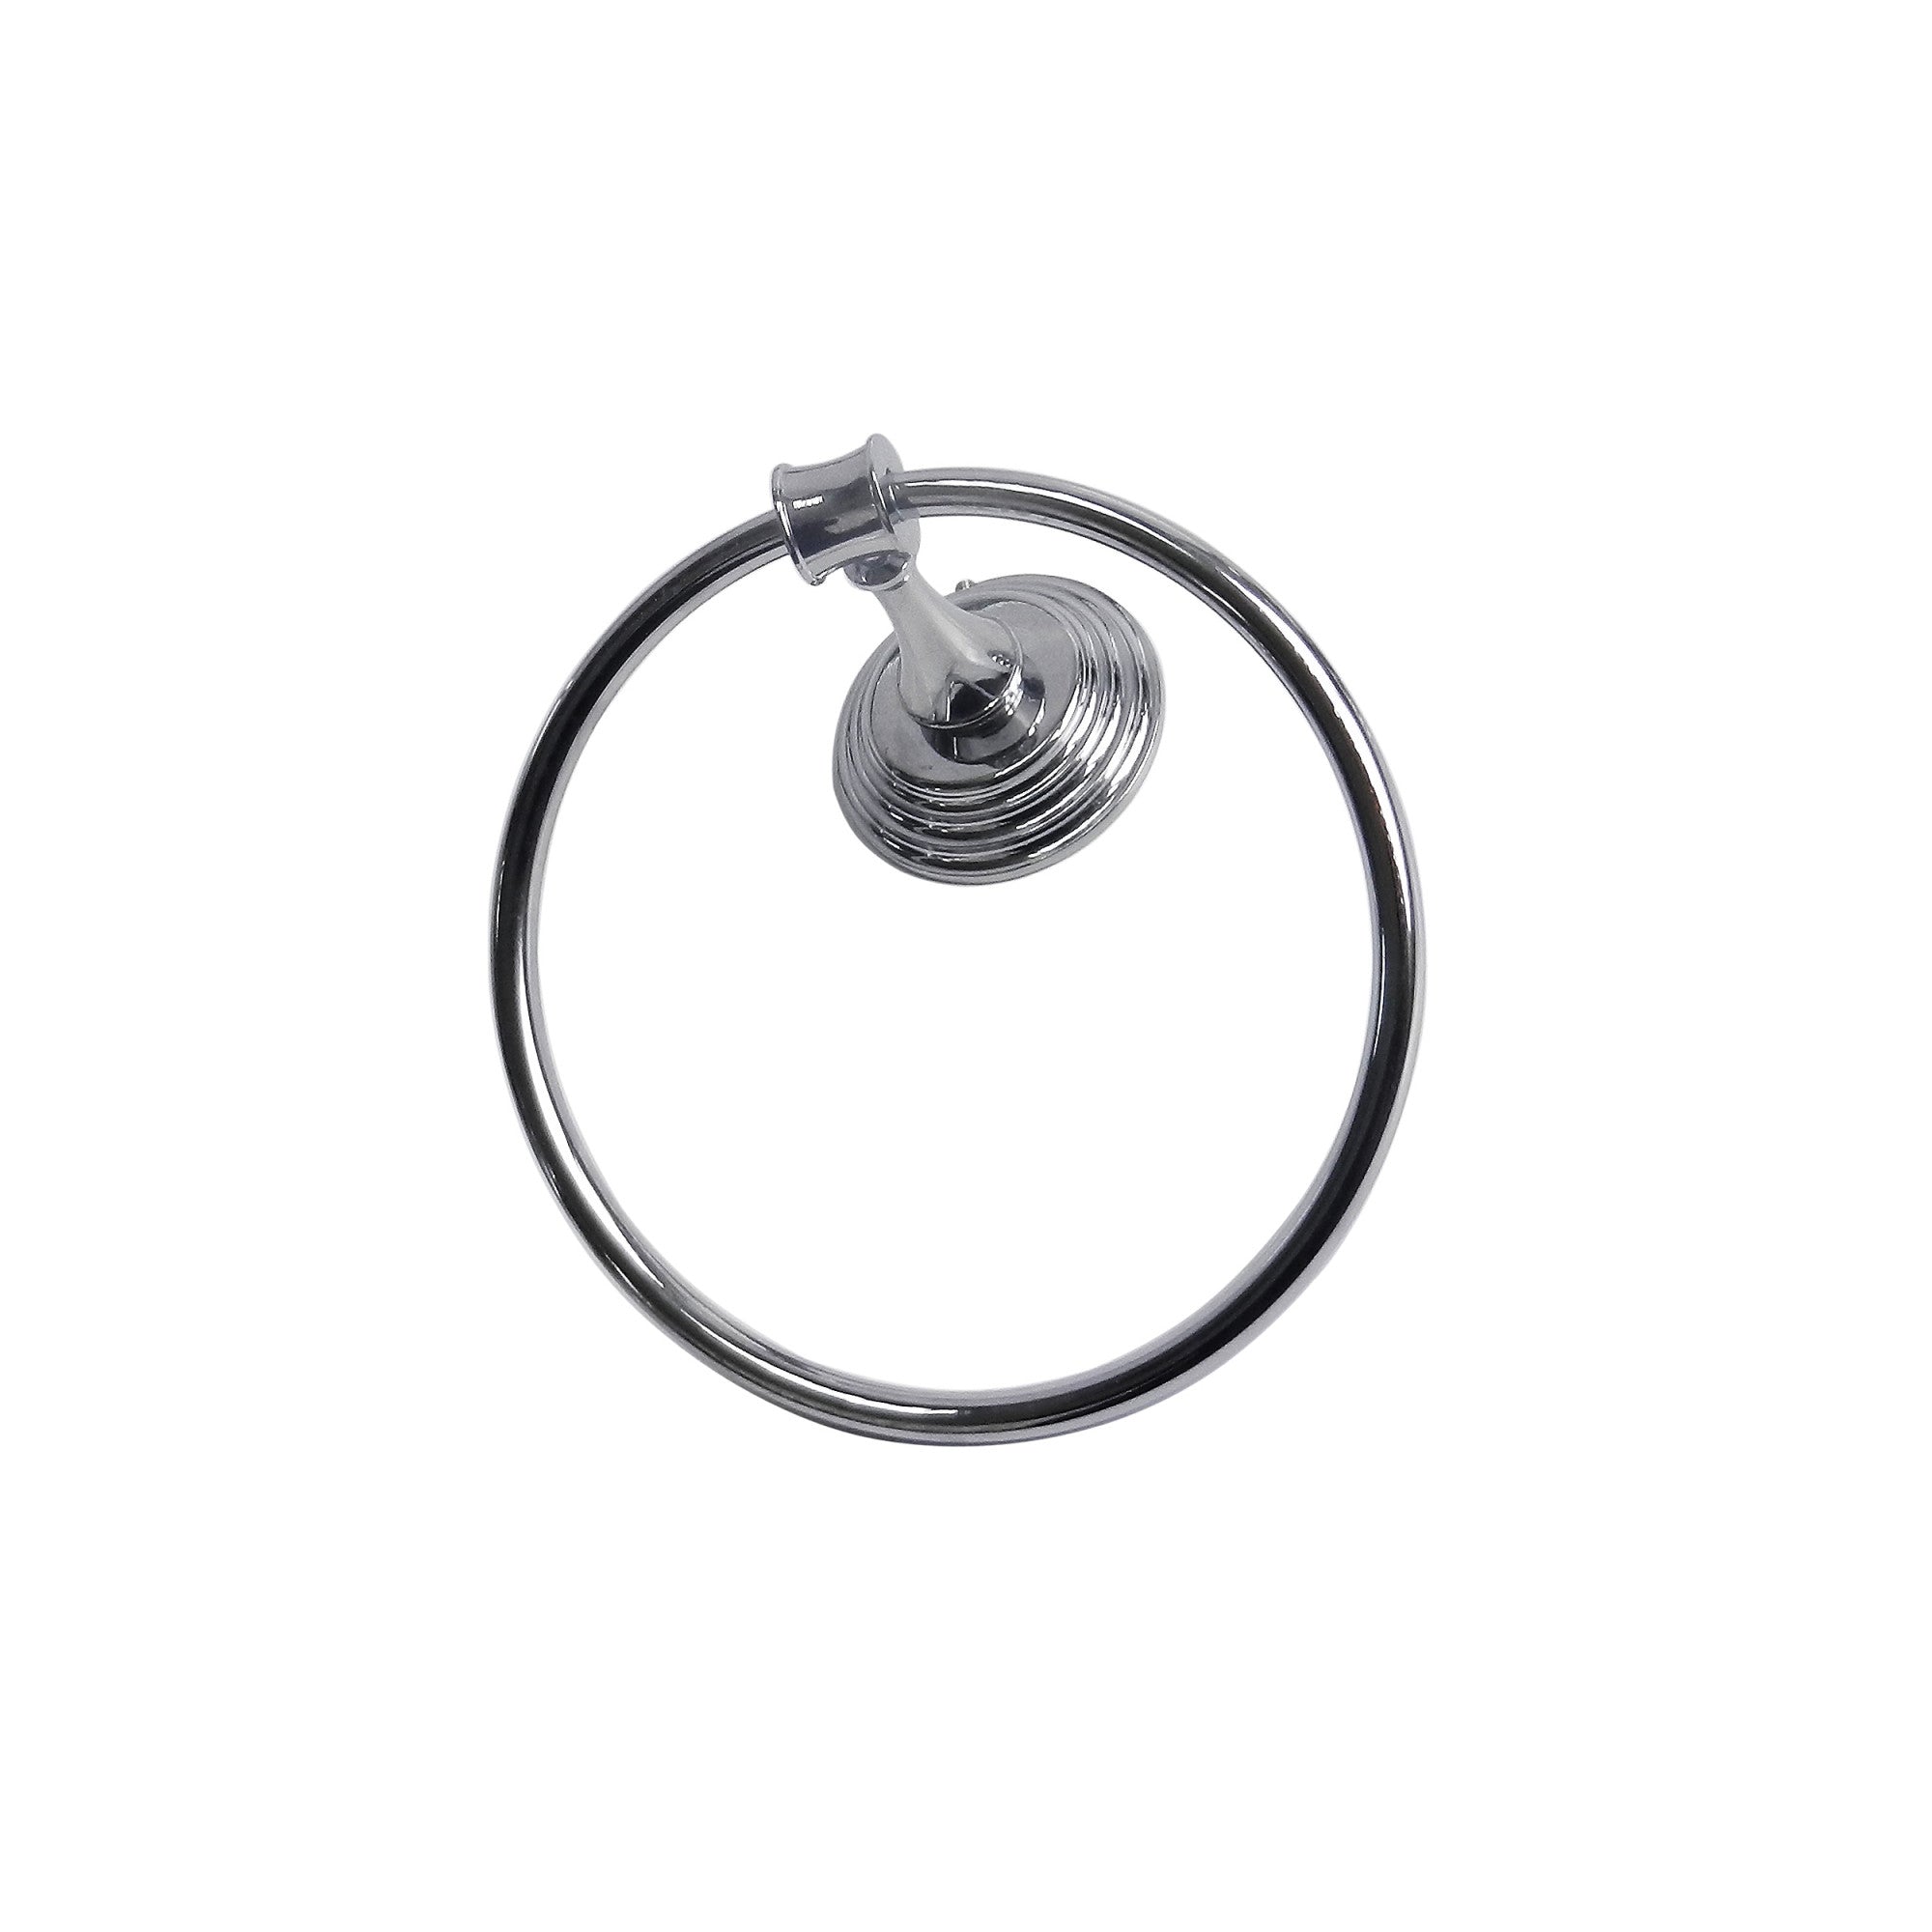 Teamson Home Wall Mounted Towel Ring, Chrome